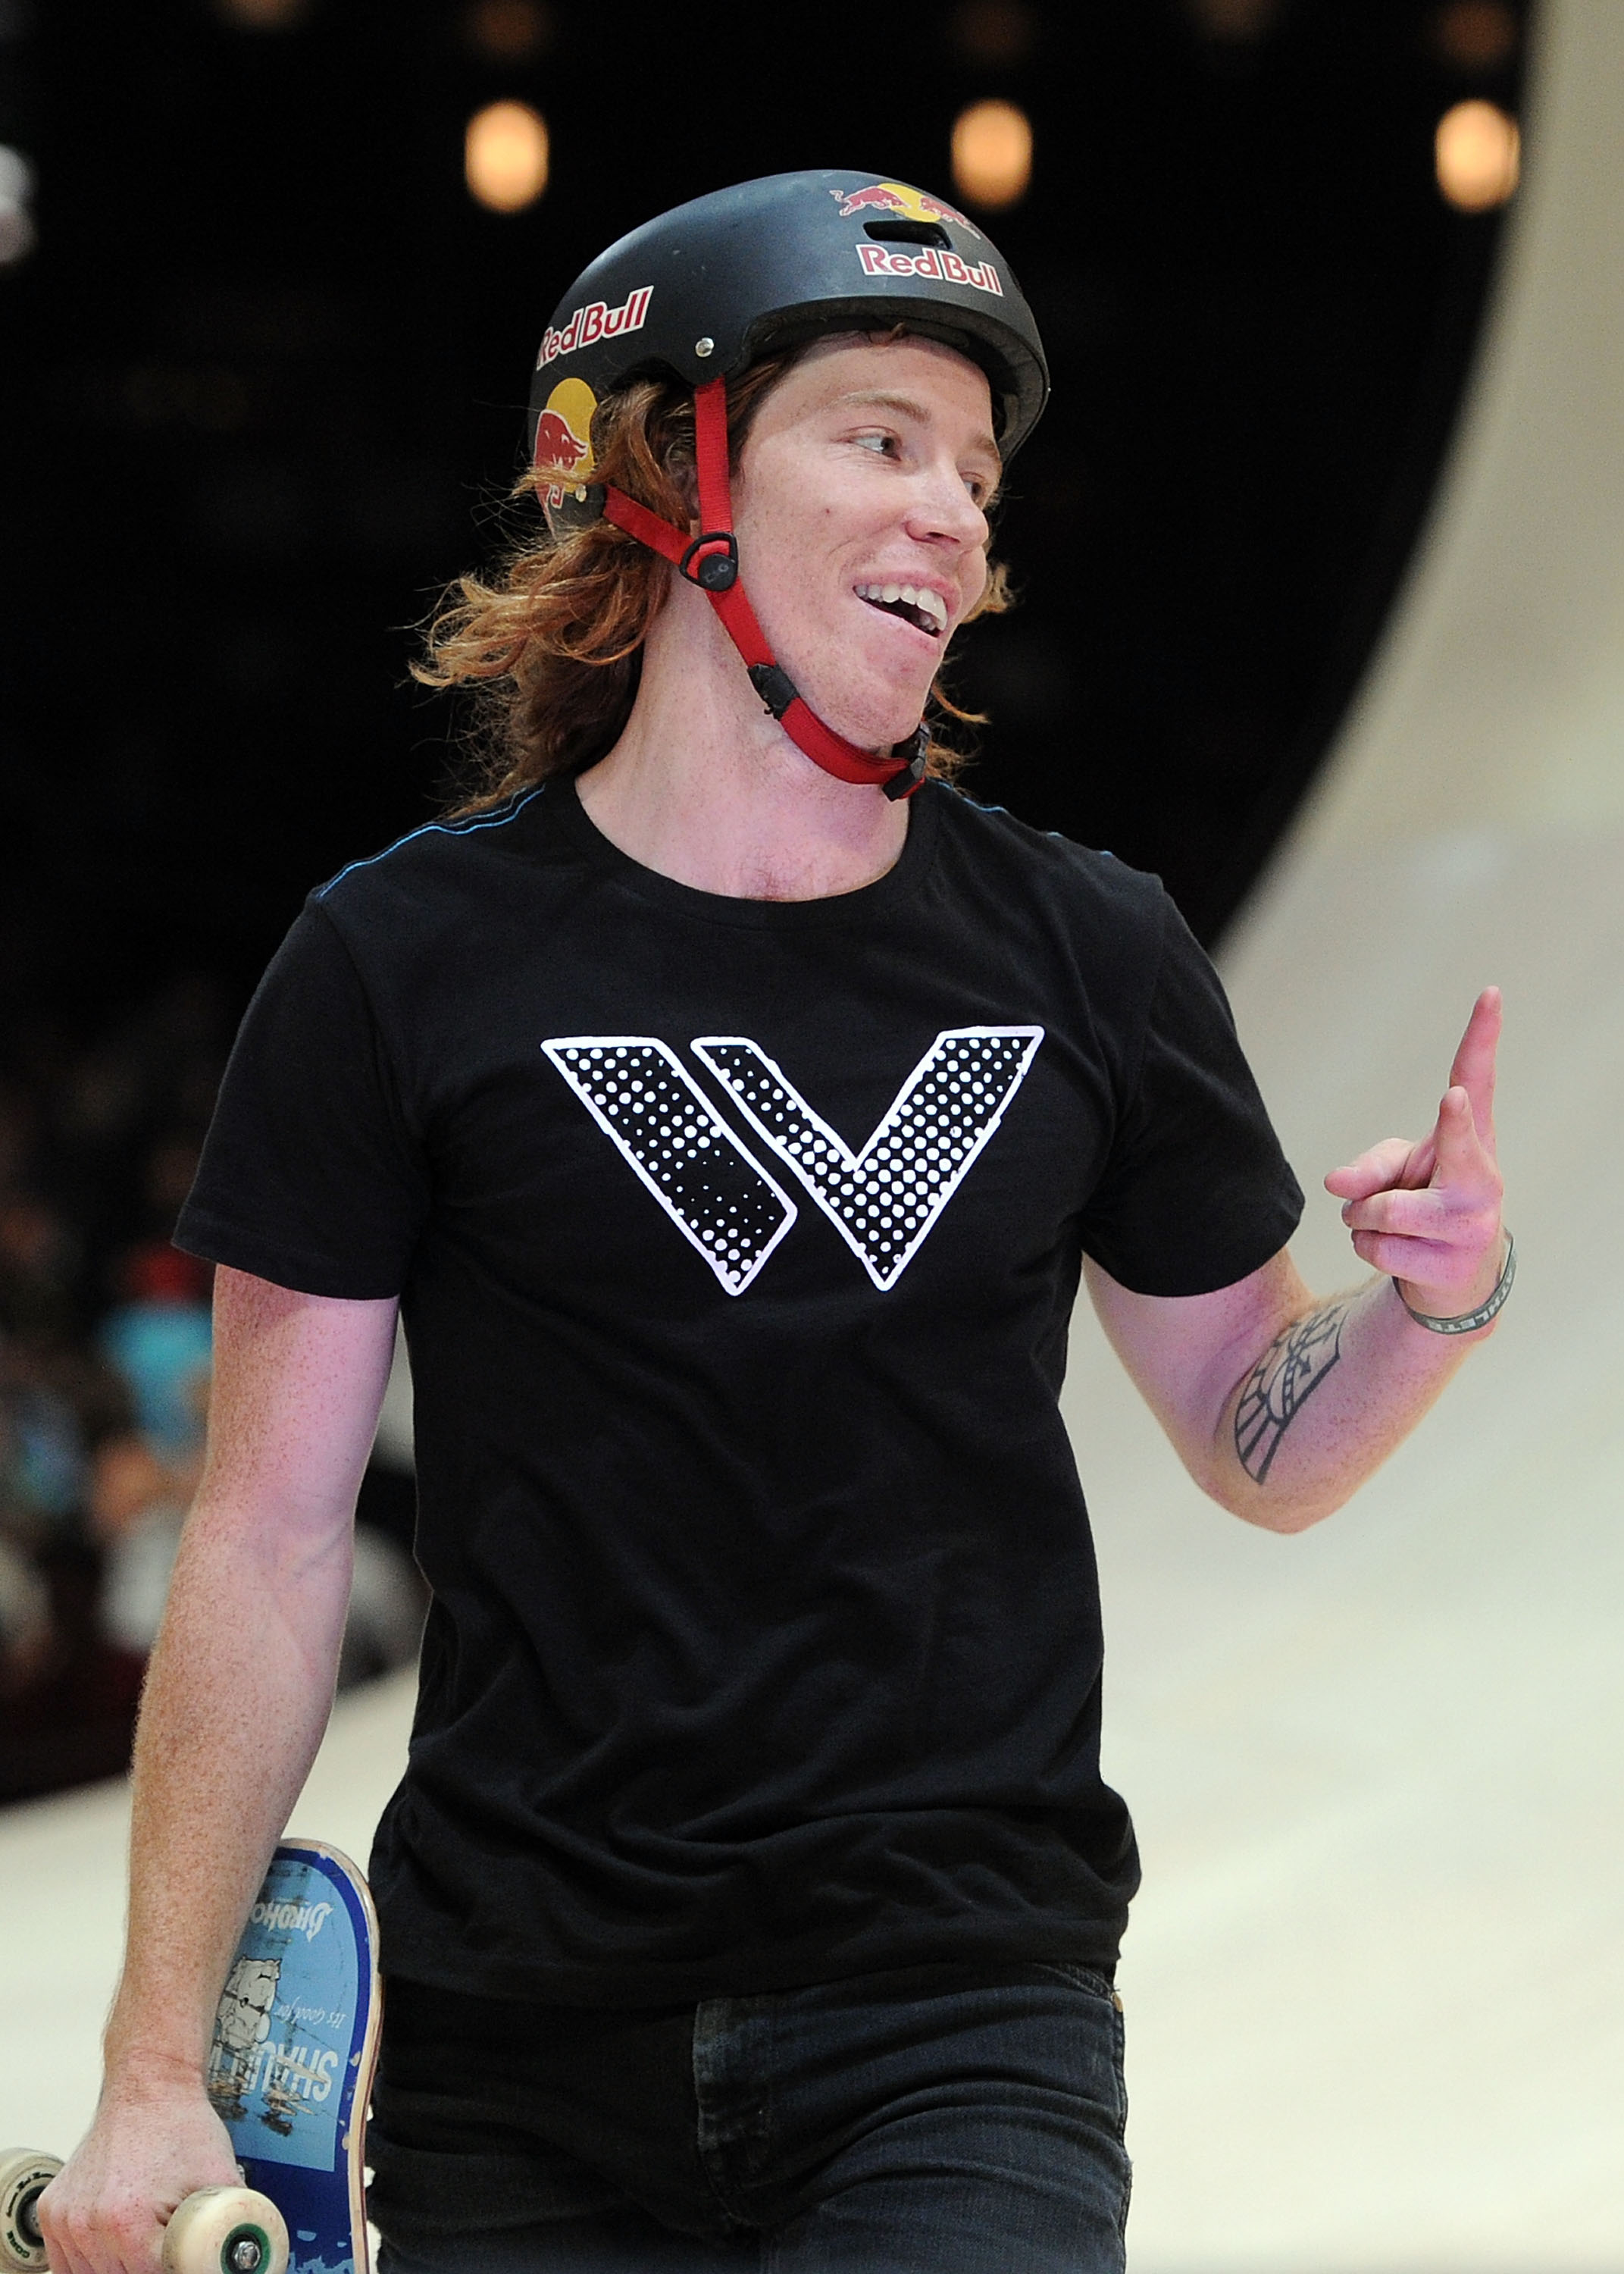 LOS ANGELES, CA - JULY 30:   Shaun White smiles as he leaves the ramp after a run as he competes in the Skateboard Vert Final during X Games 16 at the Nokia Theatre LA Live on July 30, 2010 in Los Angeles, California.  (Photo by Harry How/Getty Images)